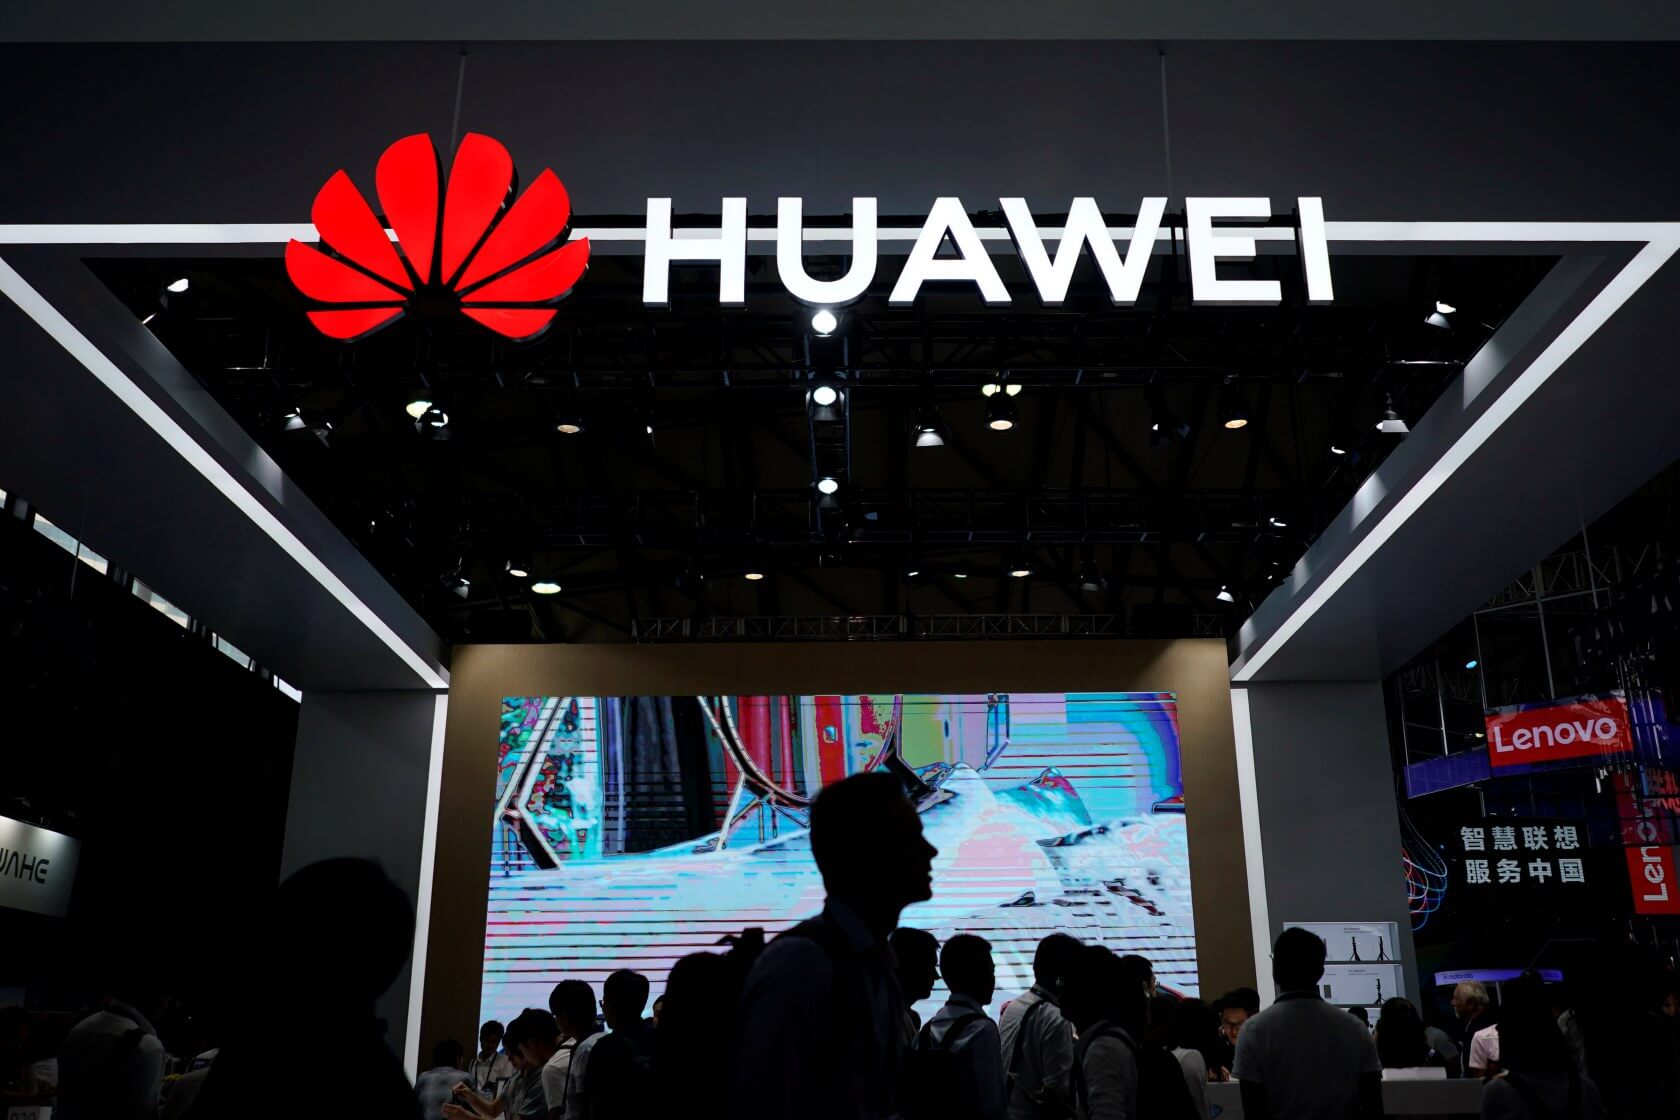 Trump declares national emergency over threats to US networks, adds Huawei to export blacklist